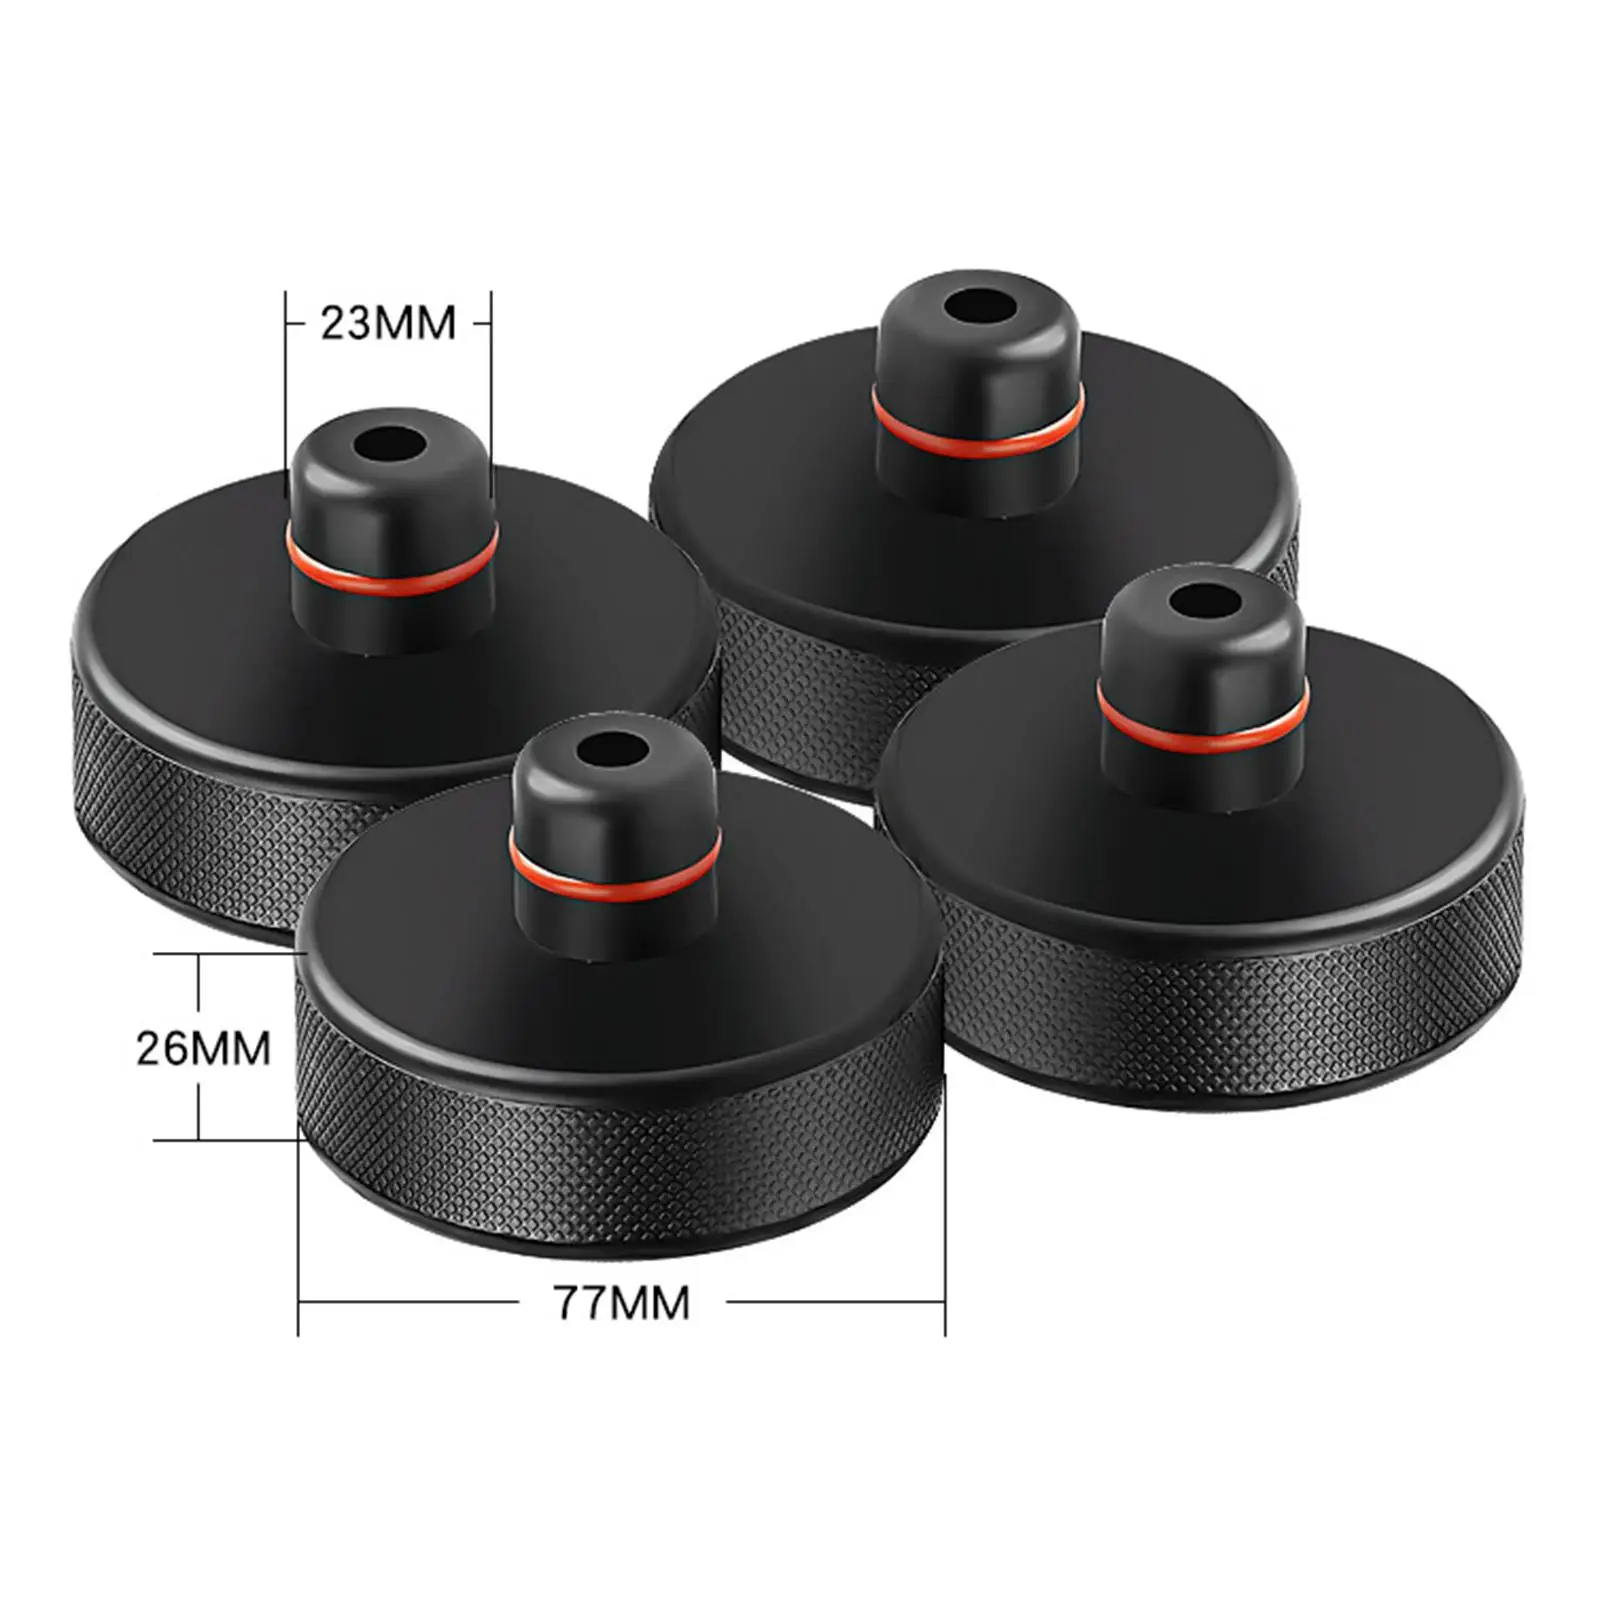 4x Jack Rubber Pad Adapter Replaces for Tesla Model 3 S x Sturdy Accessory